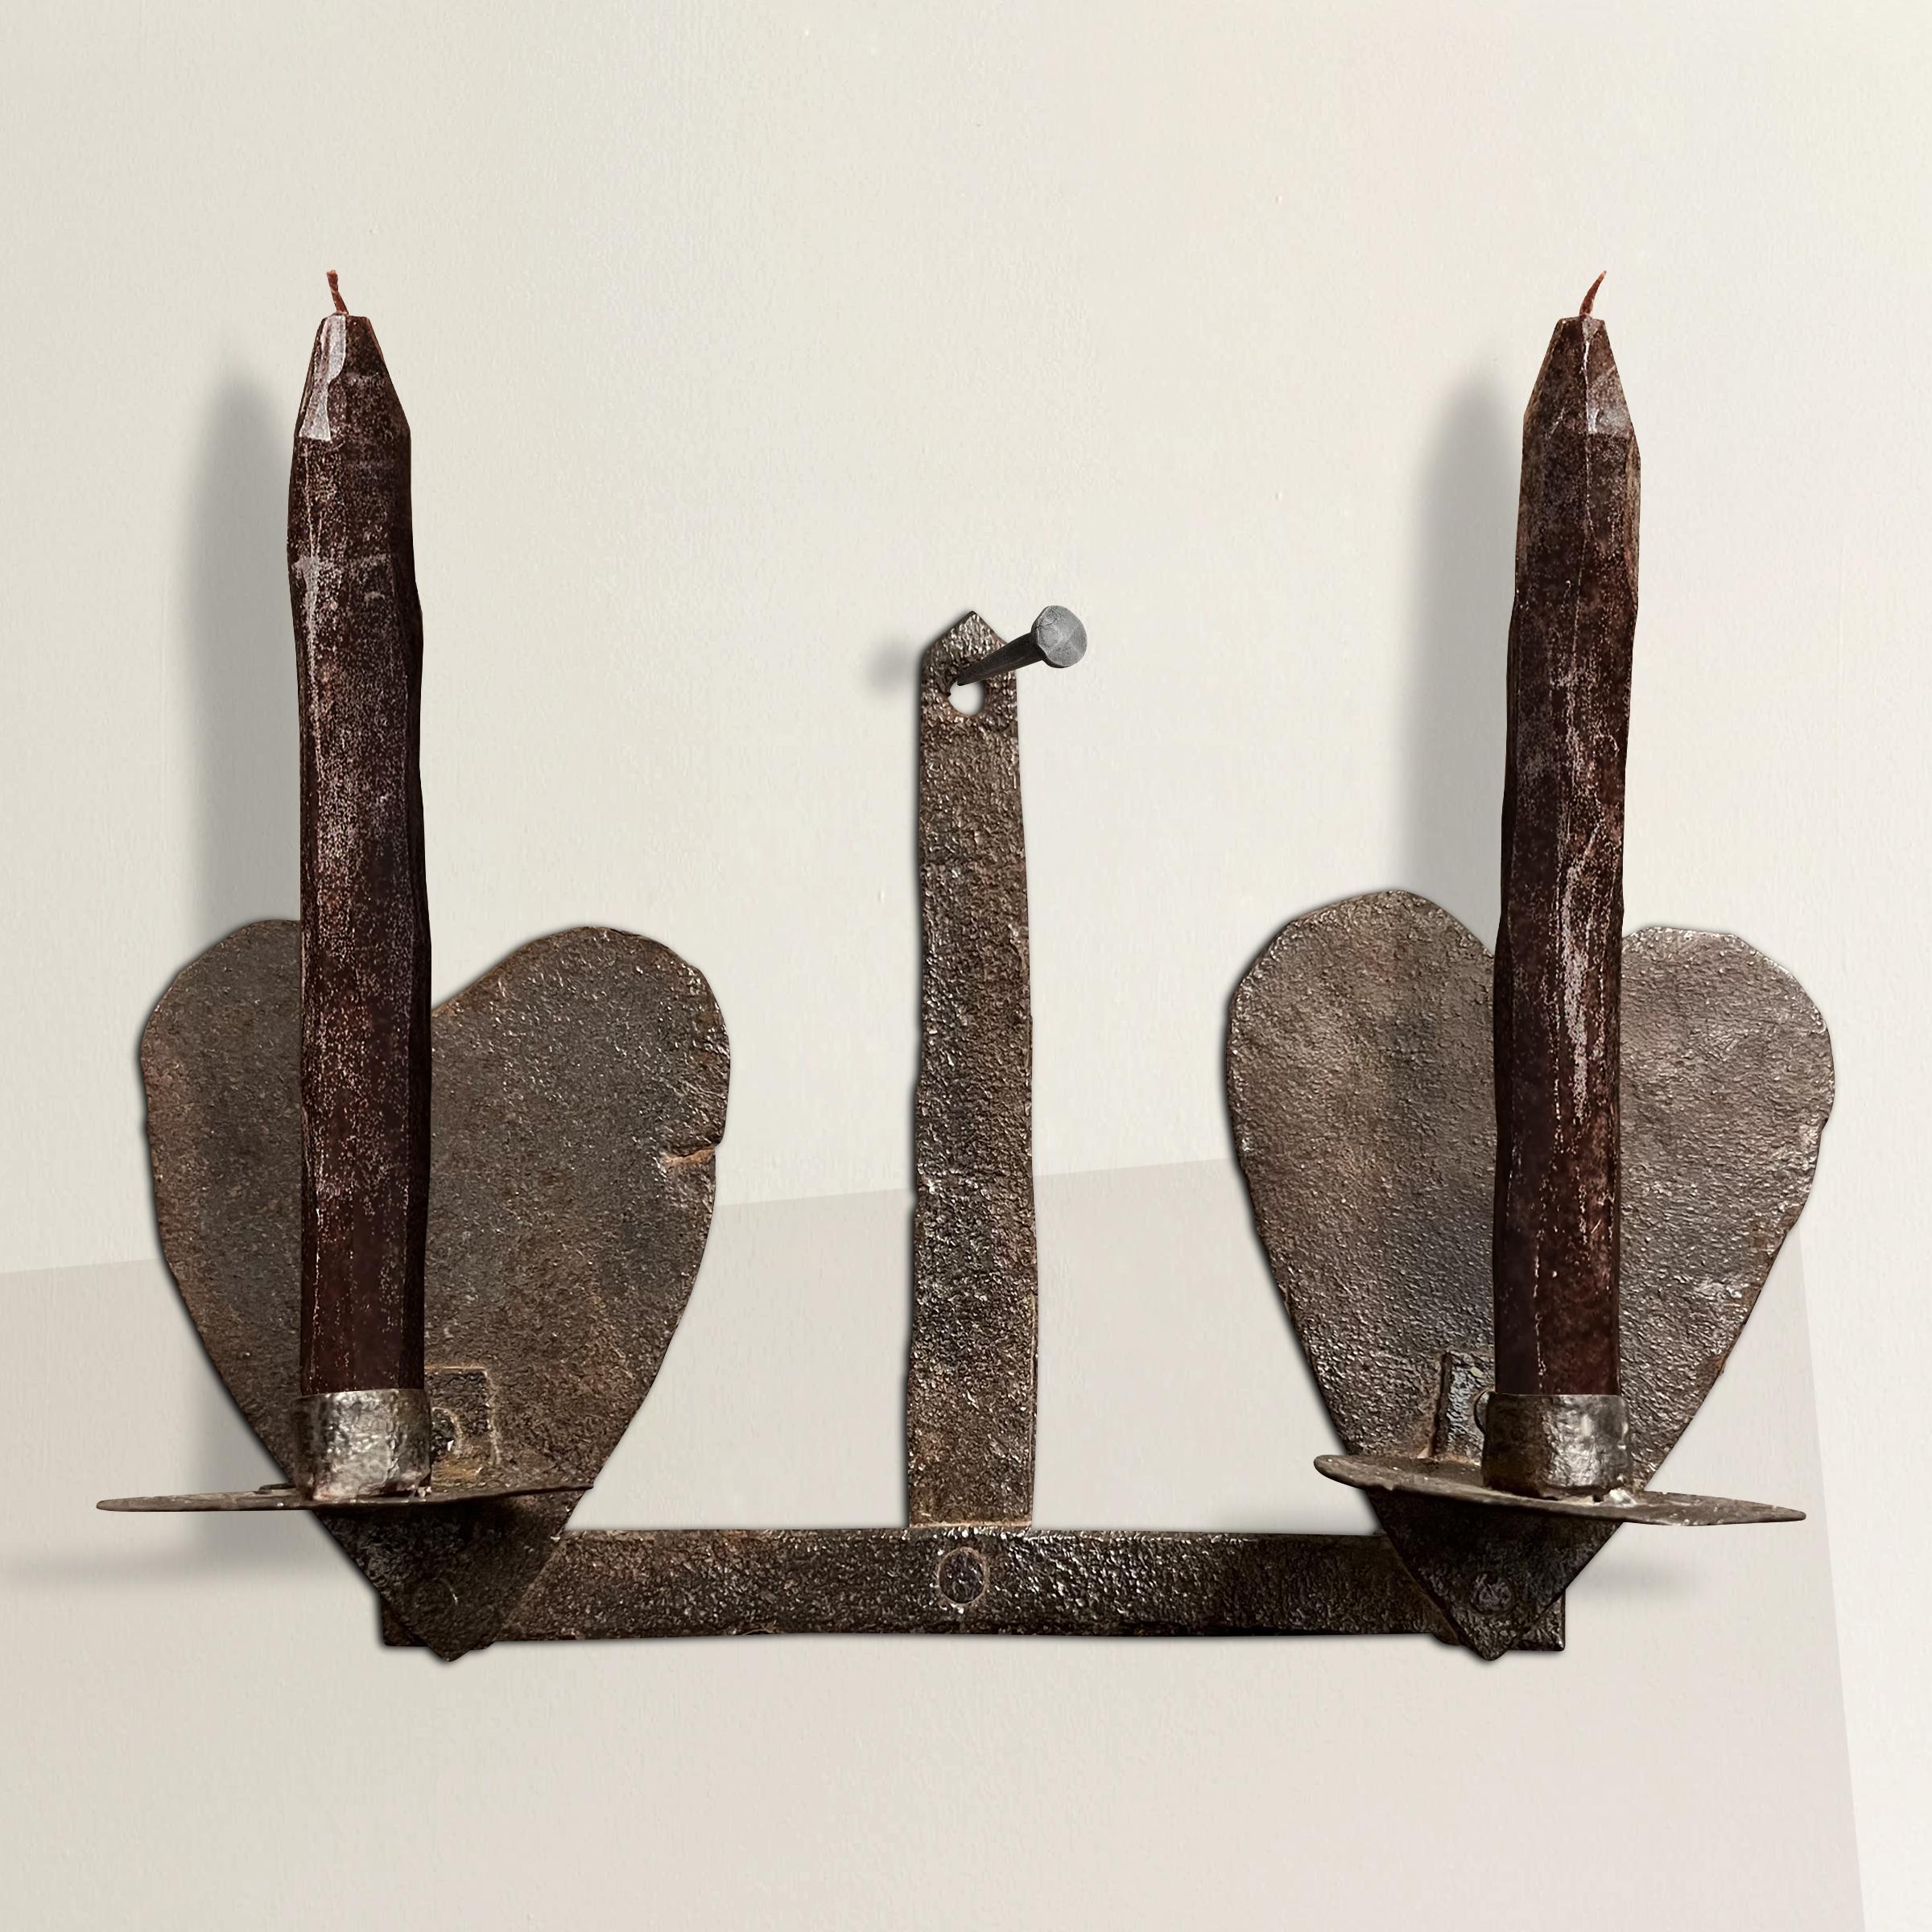 Transport yourself to 18th century America with this primitive wrought iron two-arm candle sconce, a testament to both functionality and aesthetic simplicity. The heart-shaped backplates exude a charming rustic elegance, capturing the essence of